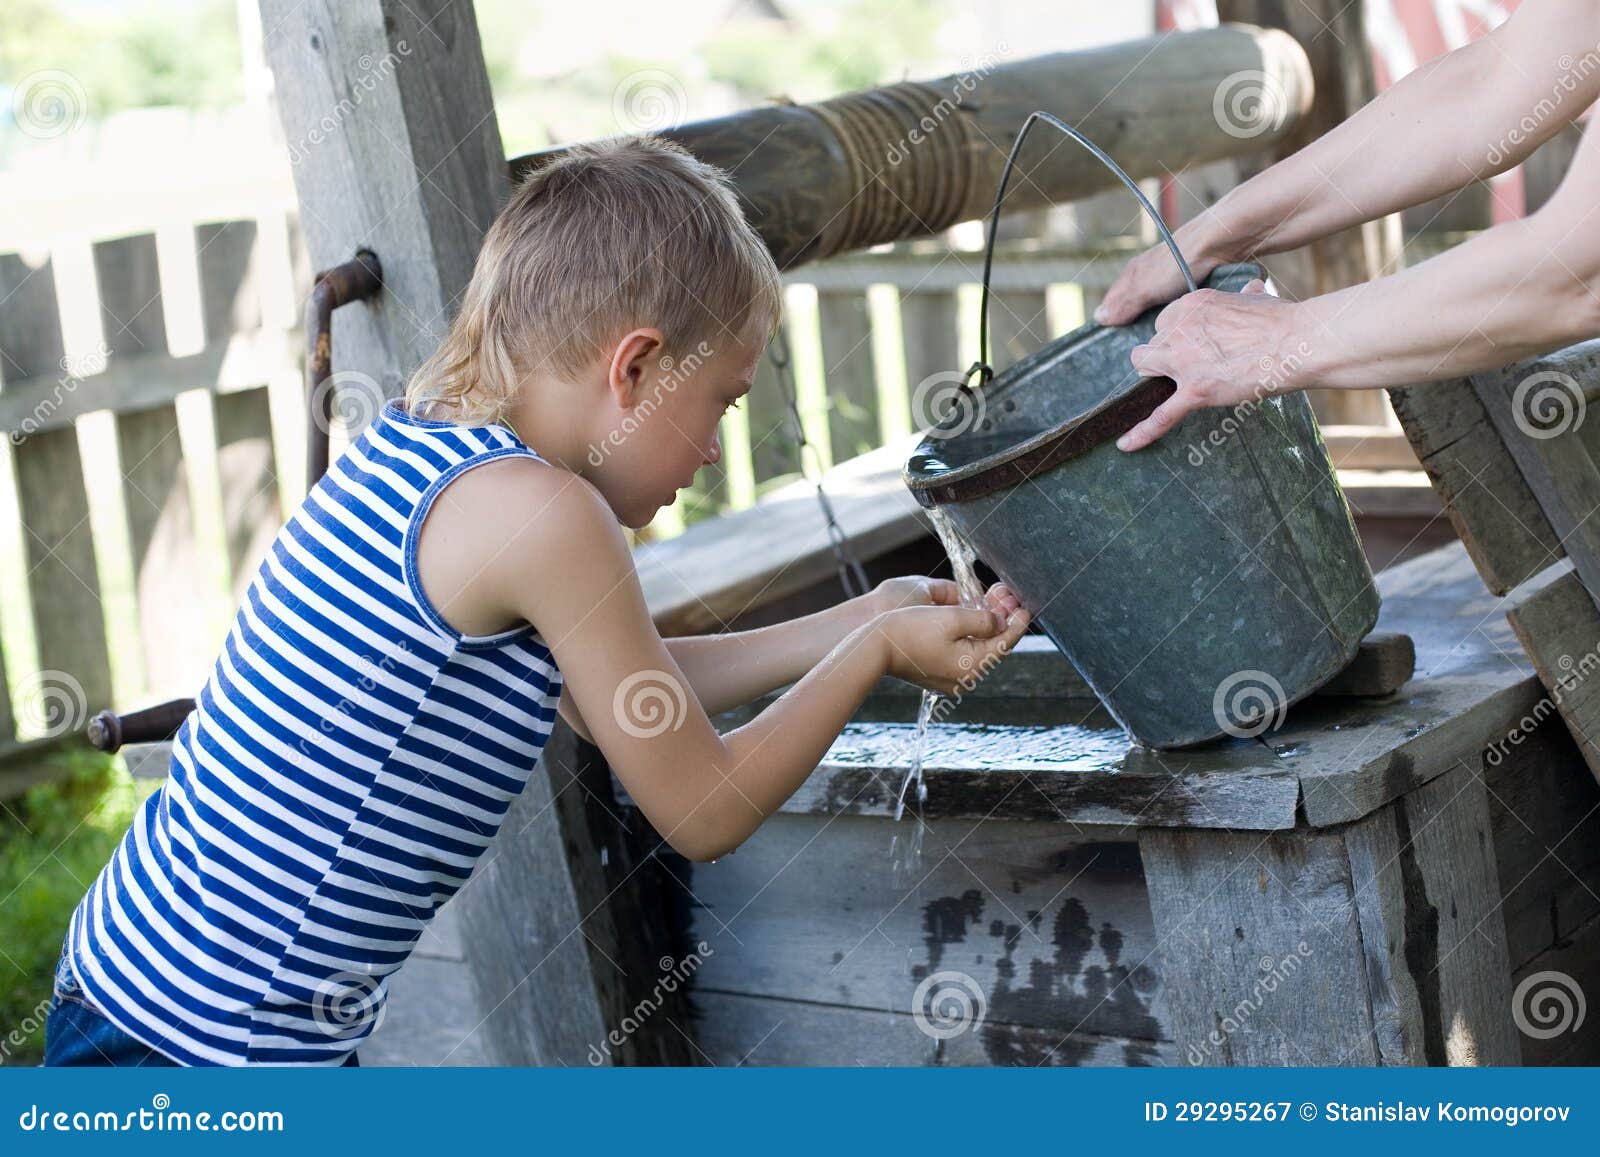 boy washes well water.